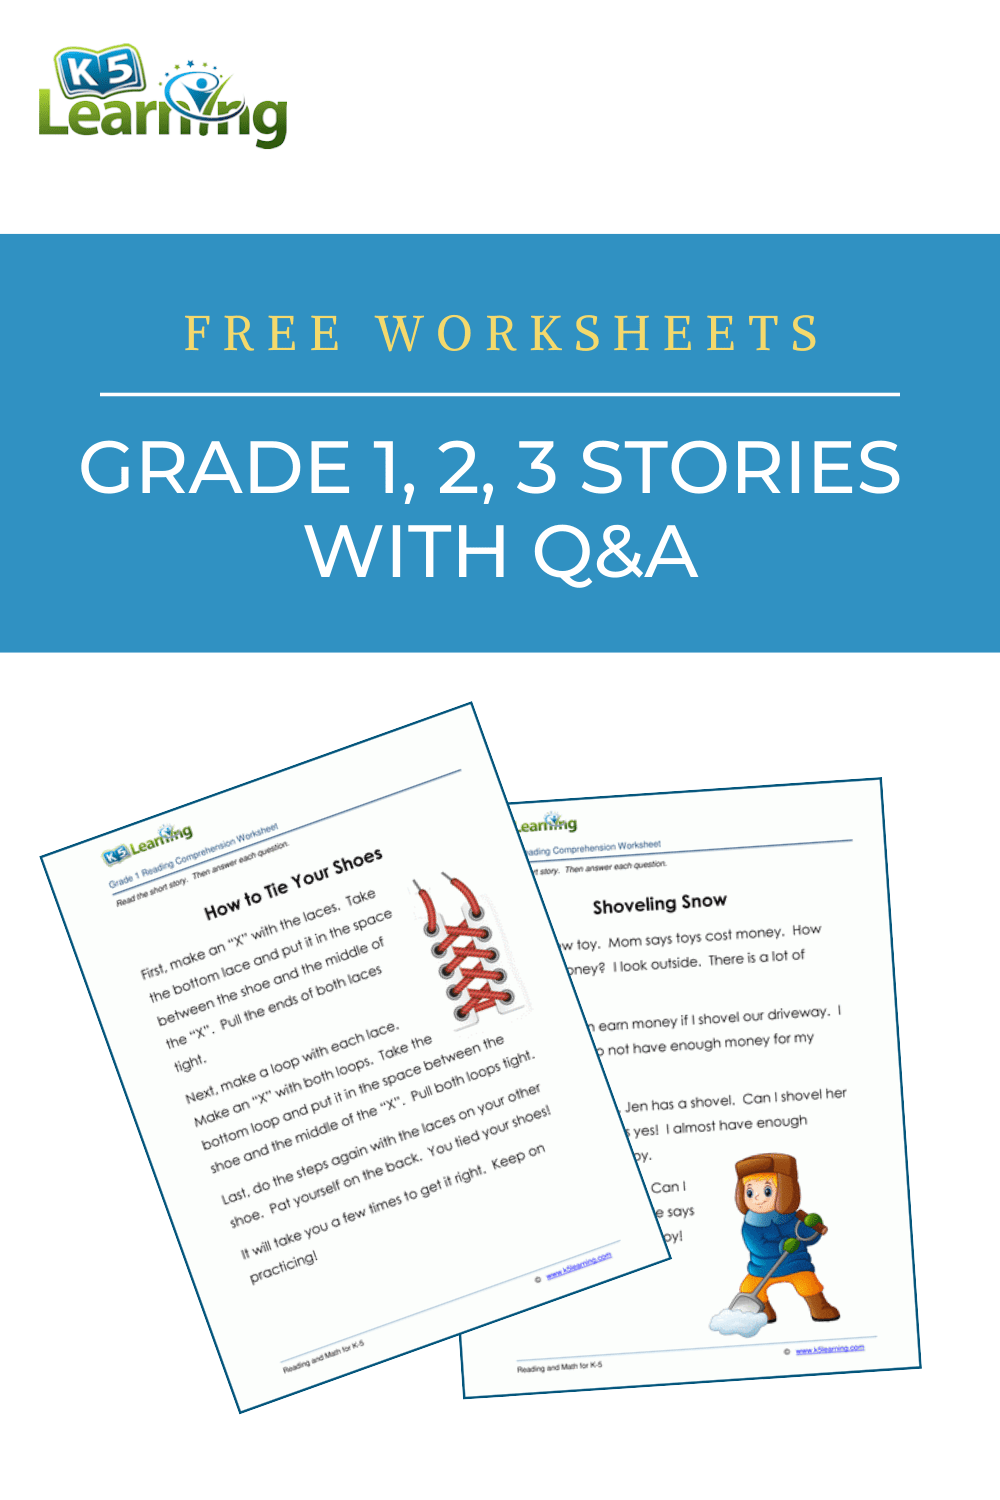 New Reading Comprehension Worksheets for Grades 1, 2 and 3 | K5 Learning